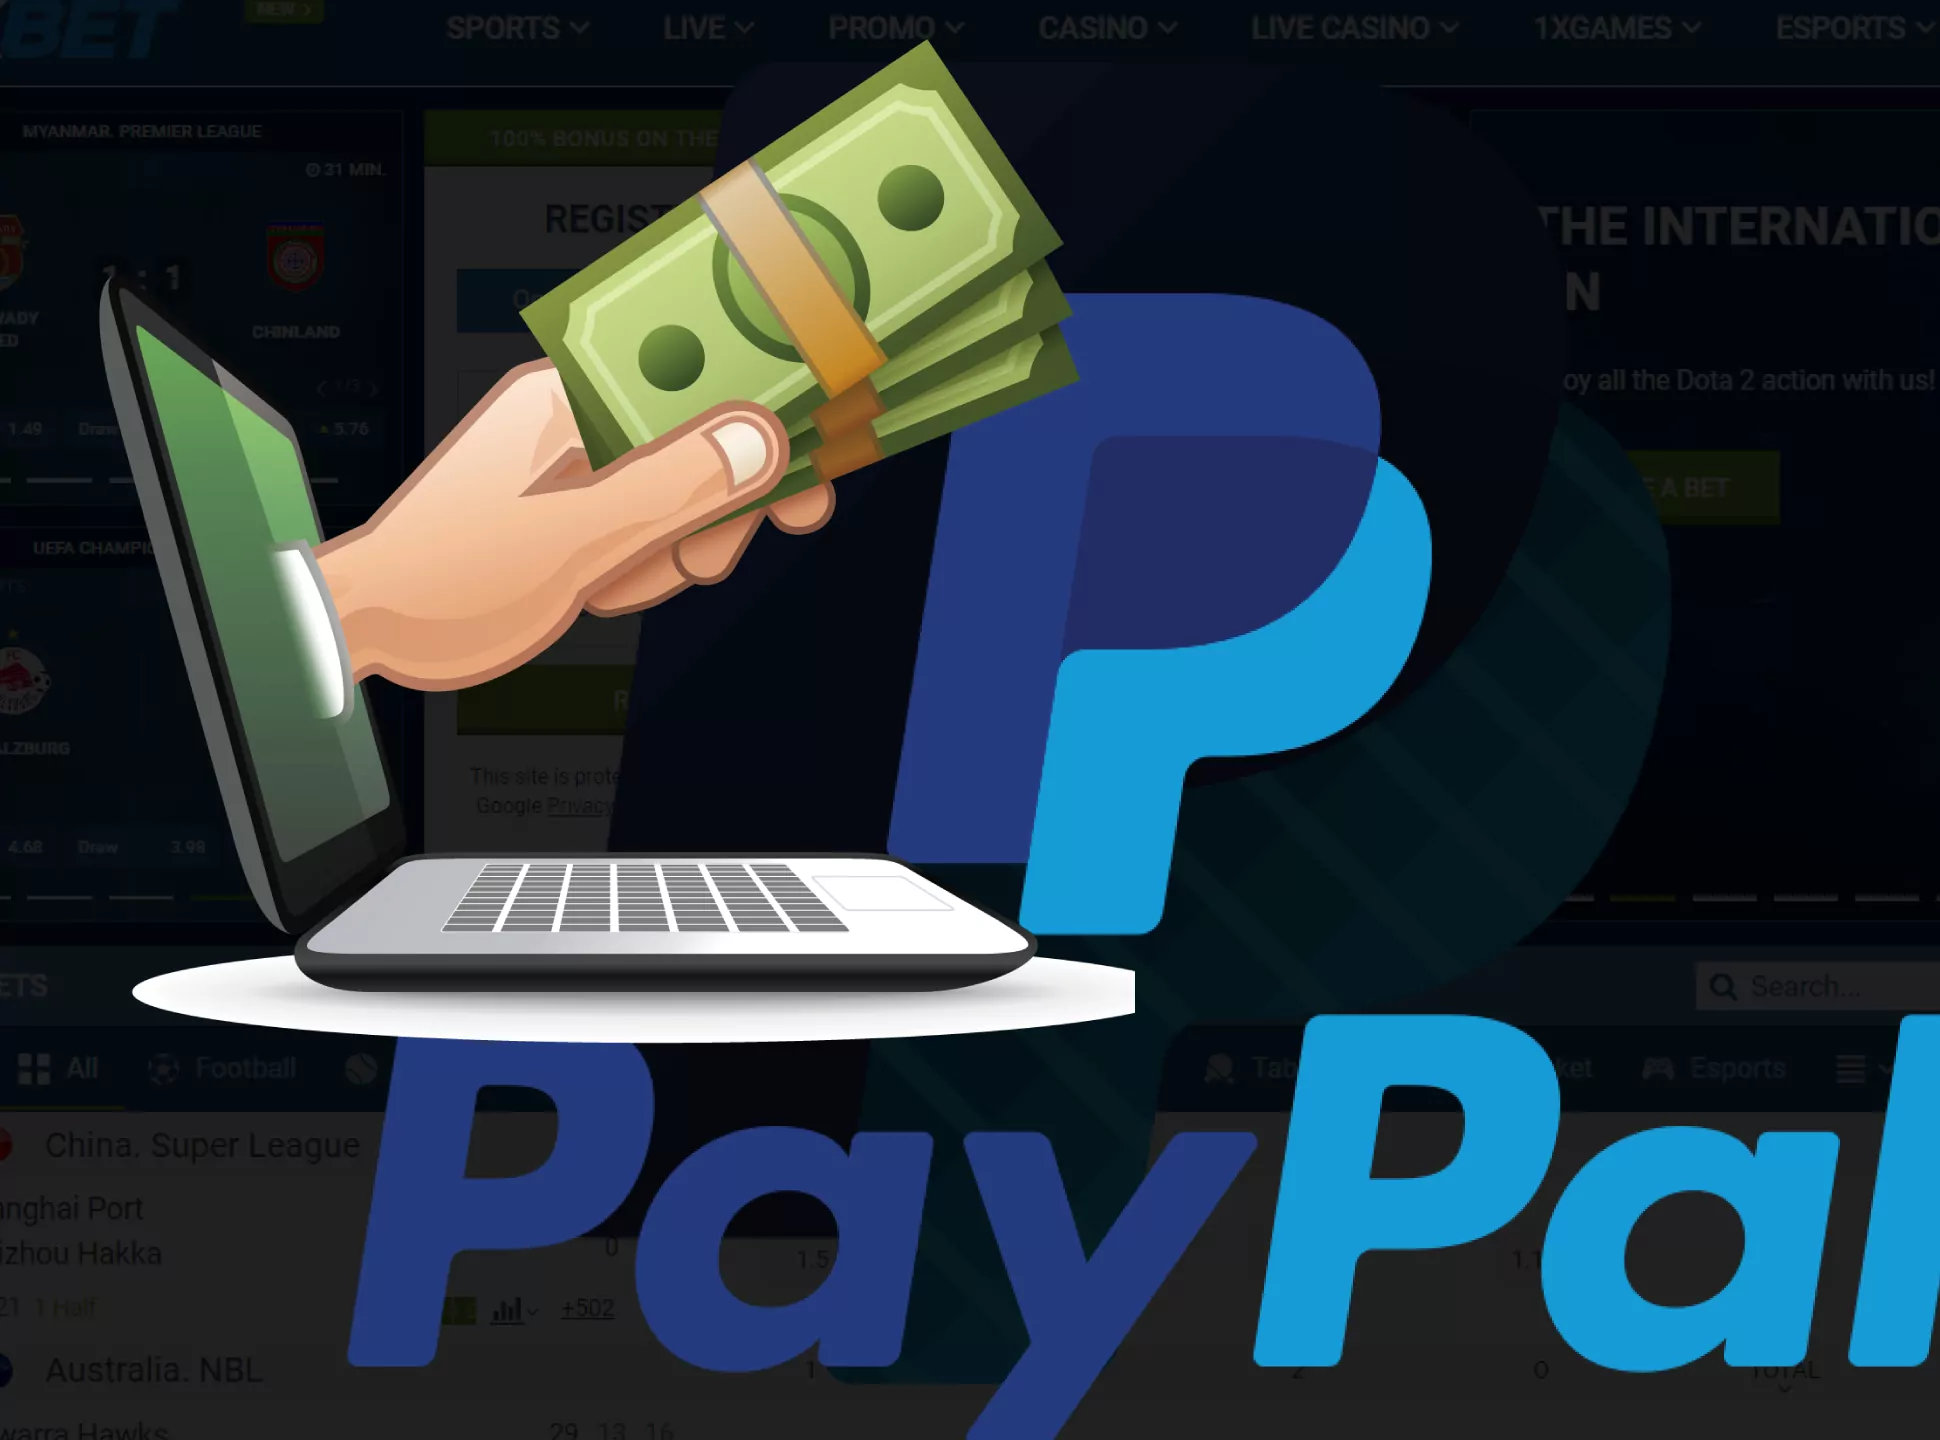 You can withdraw your money via PayPal for up to 3 days.